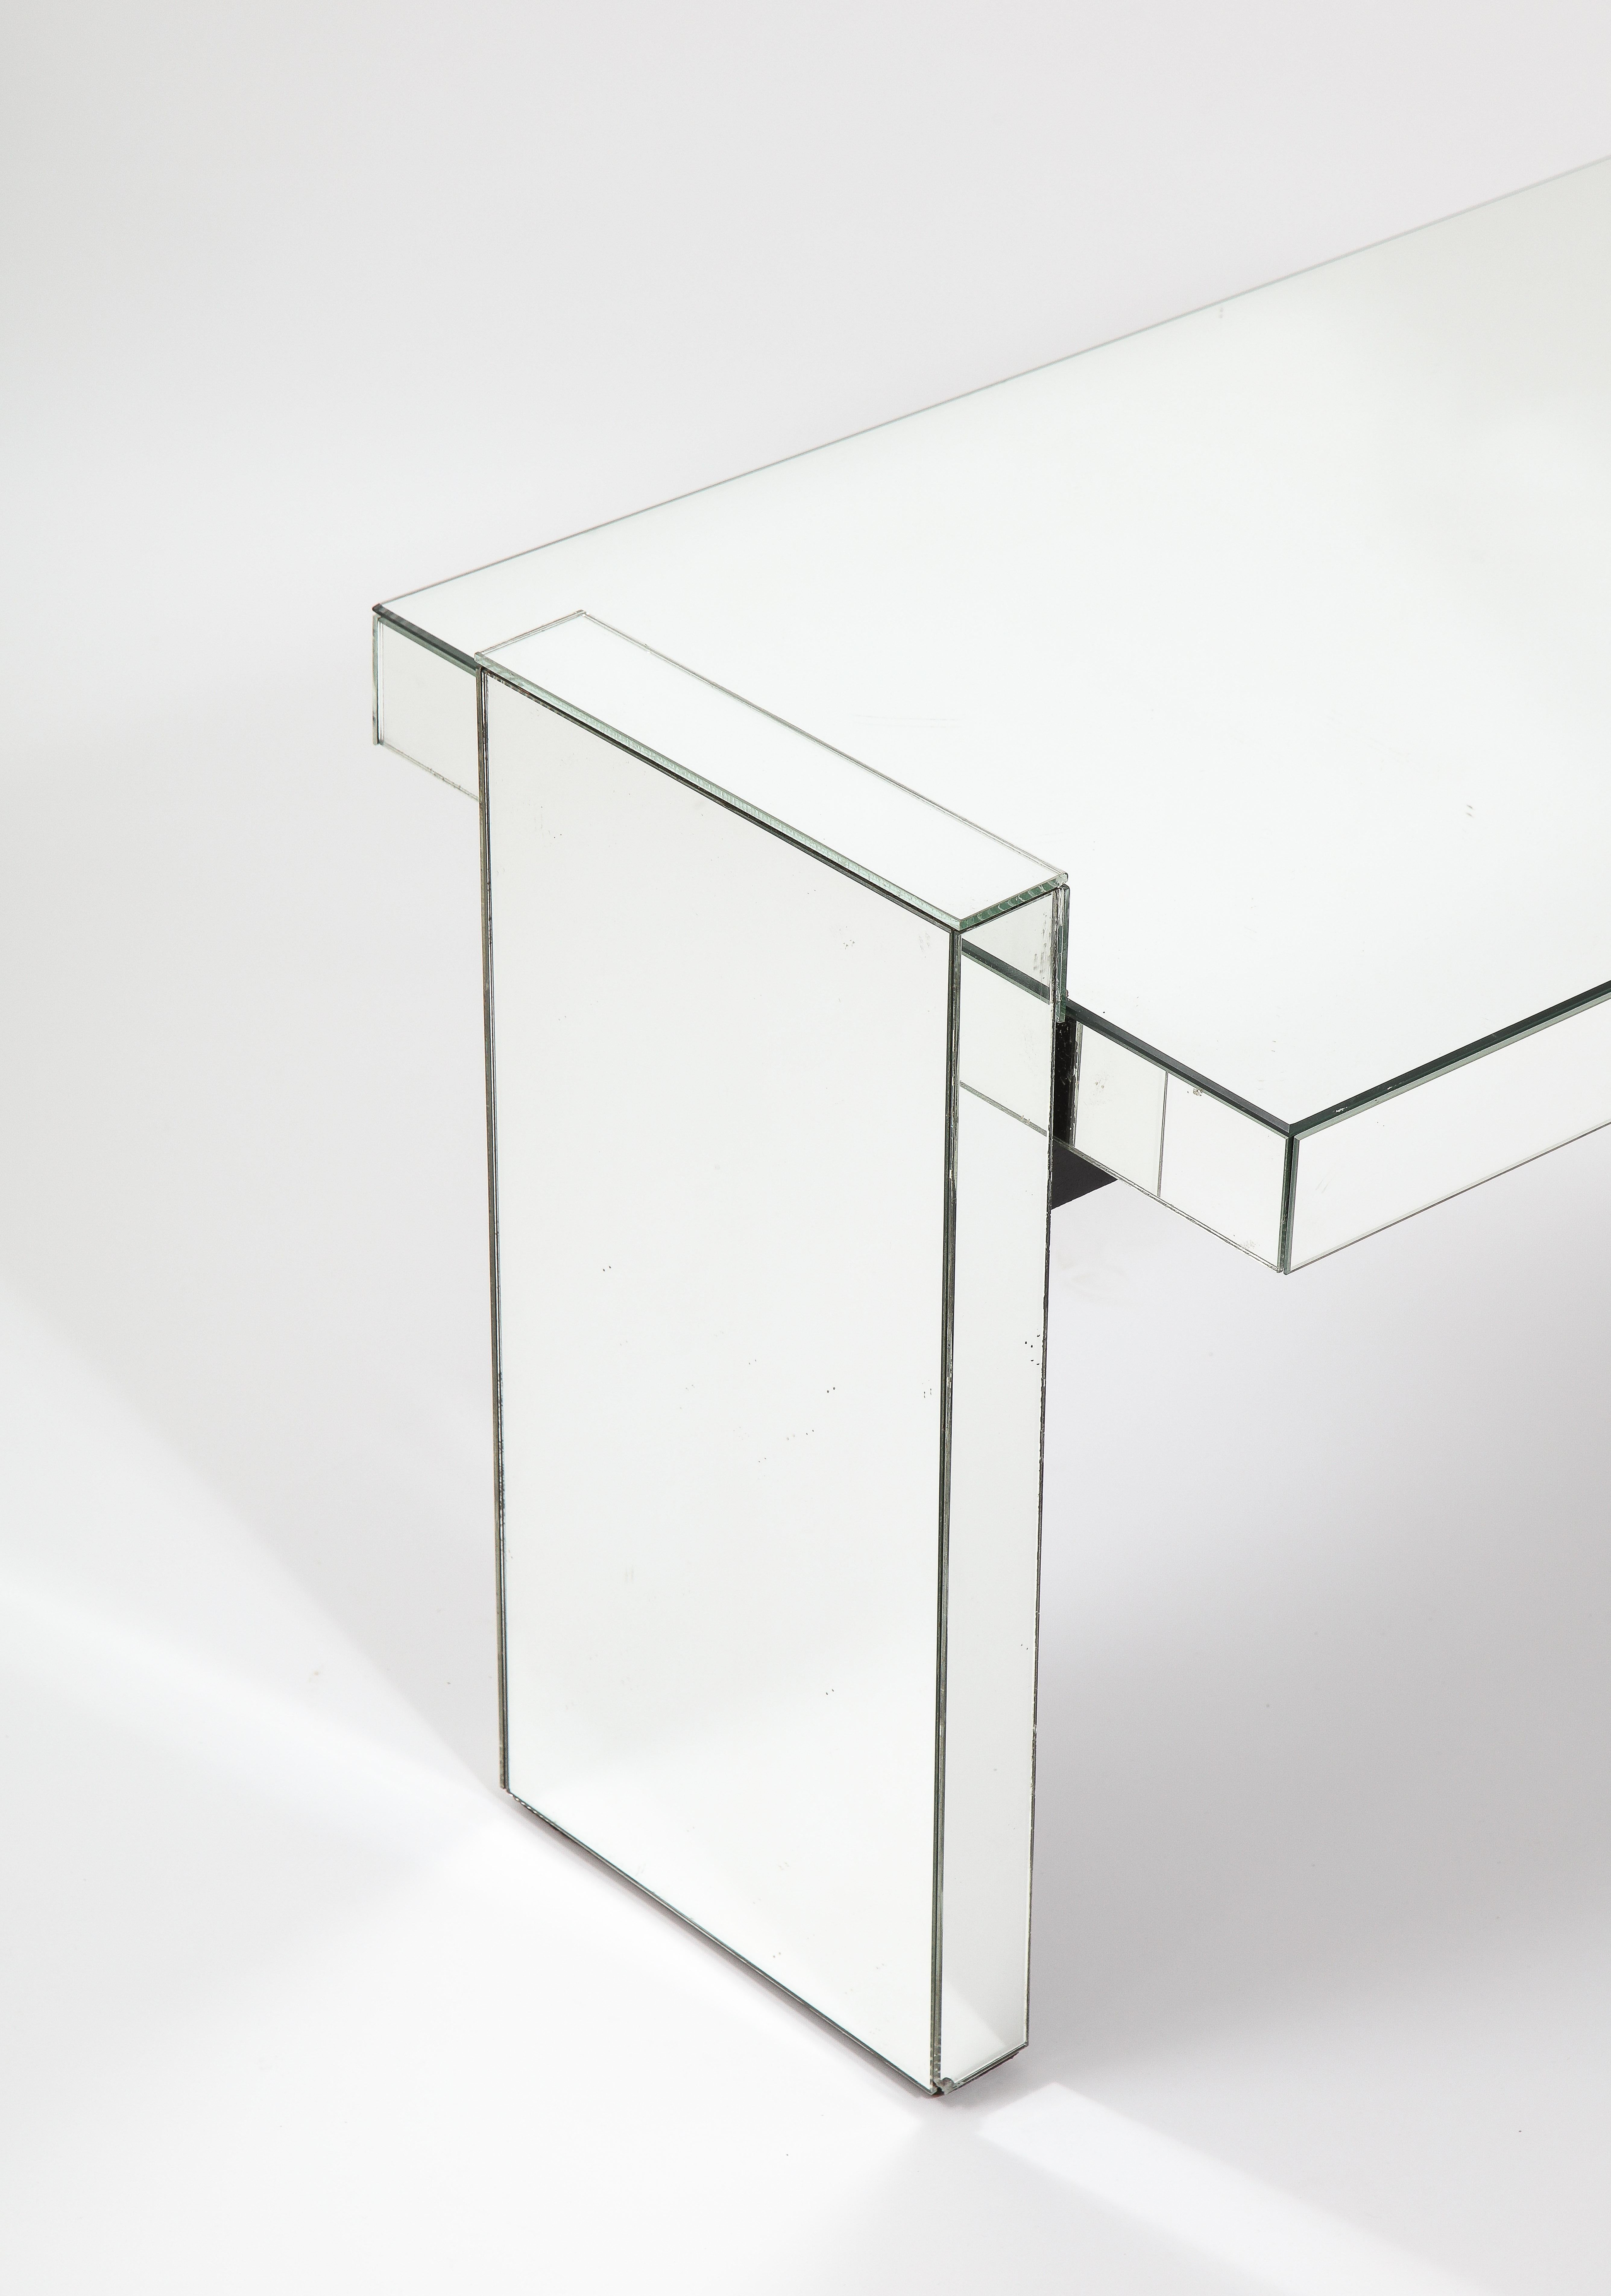 A Jacques Adnet mirrored table in the artist's classic vernacular, a simple yet strong shape clad in mirror.